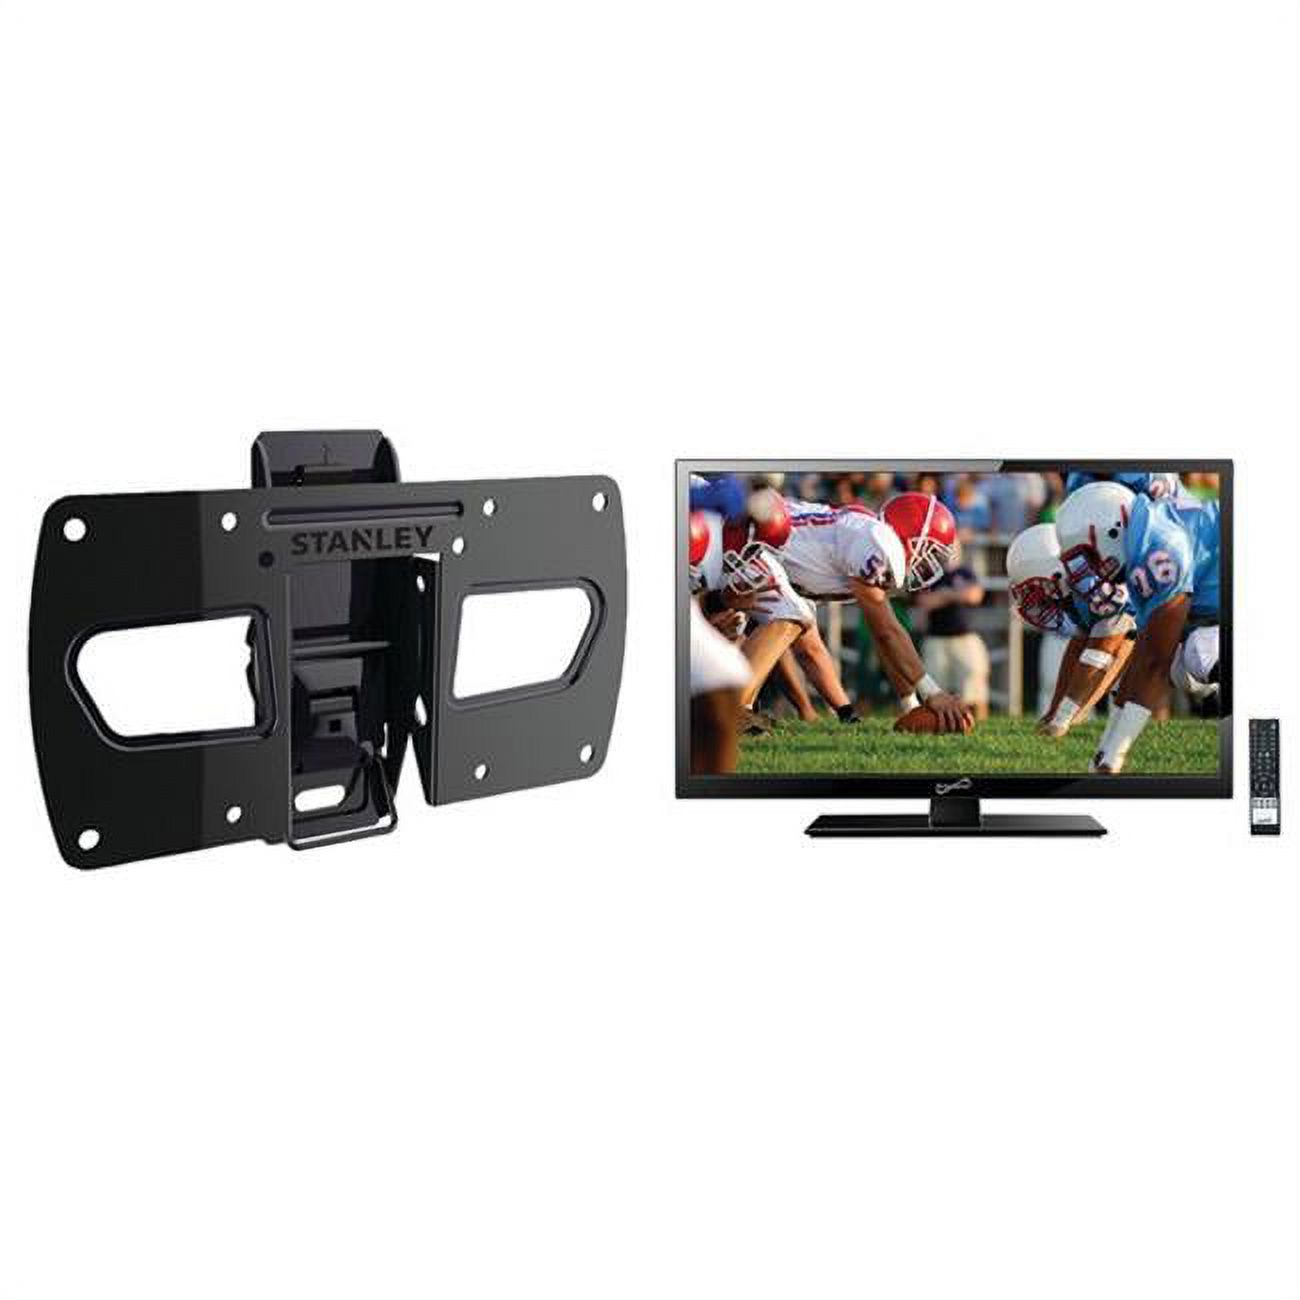 Supersonic 24" Class Full HD (1080P) Portable LED TV (SC-2411) and Stanley TMR-EC3103T Tilt Wall Mount - image 1 of 1